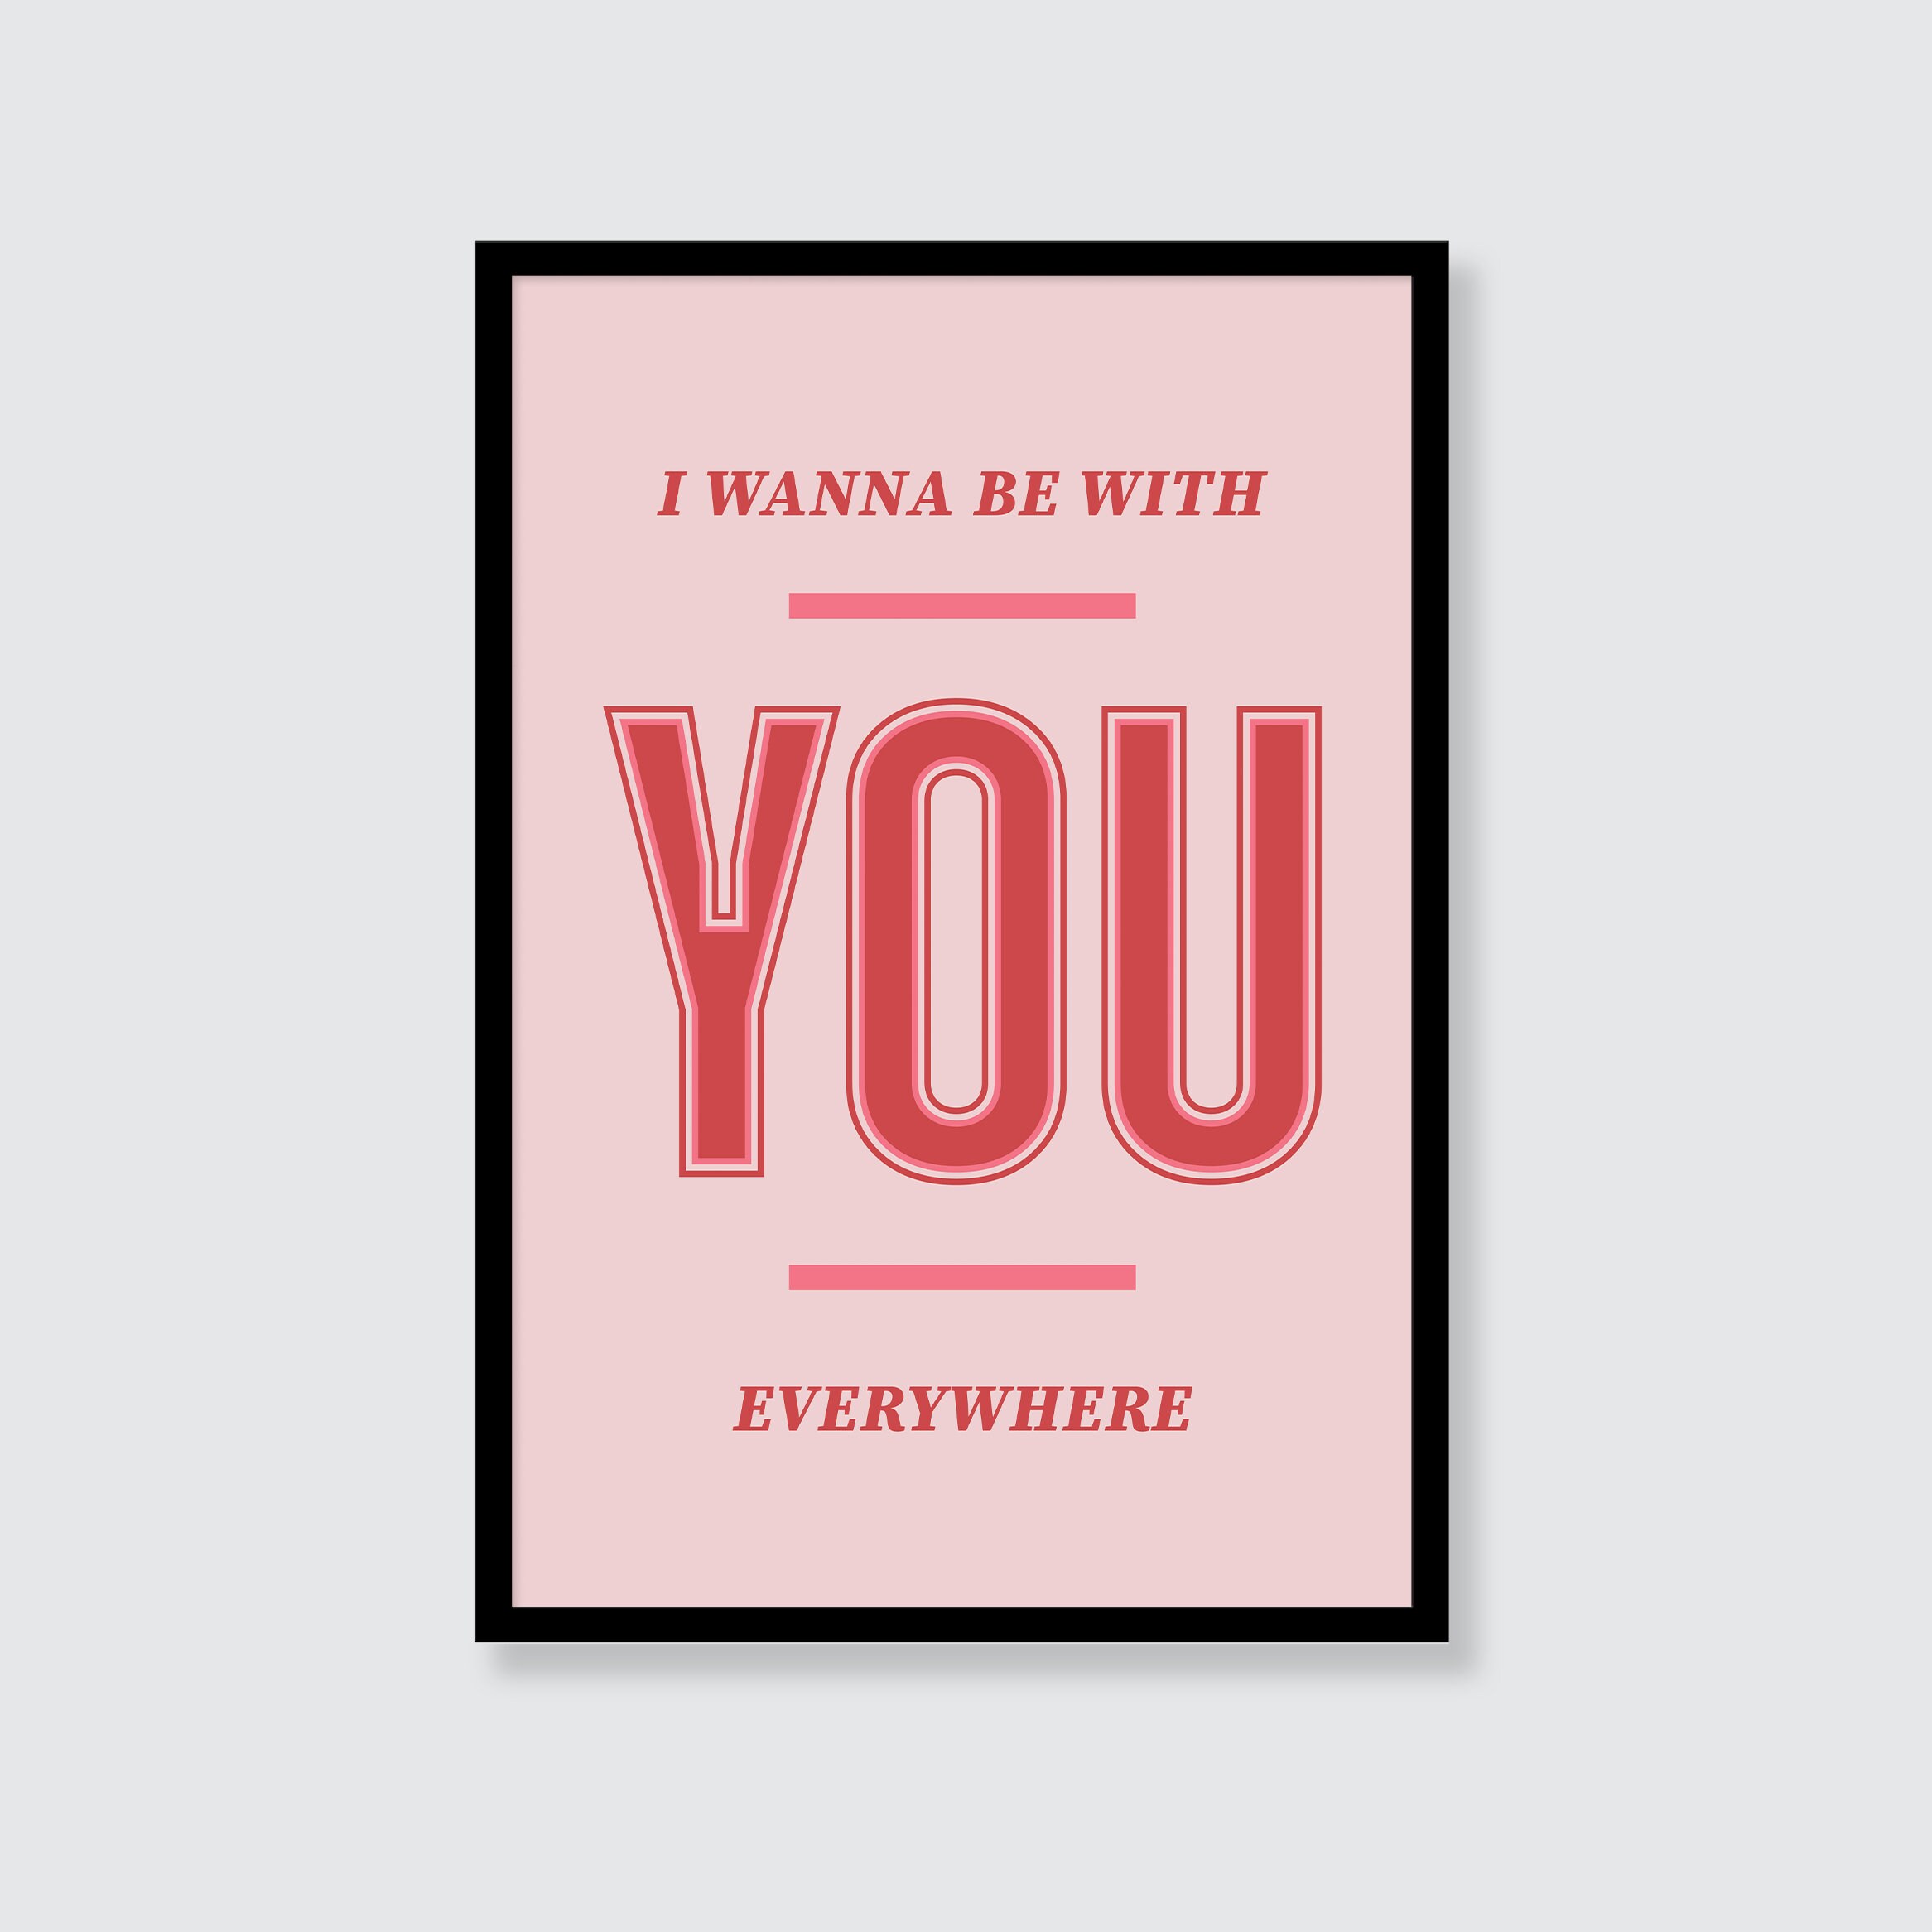 I Want to Be With You Everywhere Art Print Fleetwood Mac 